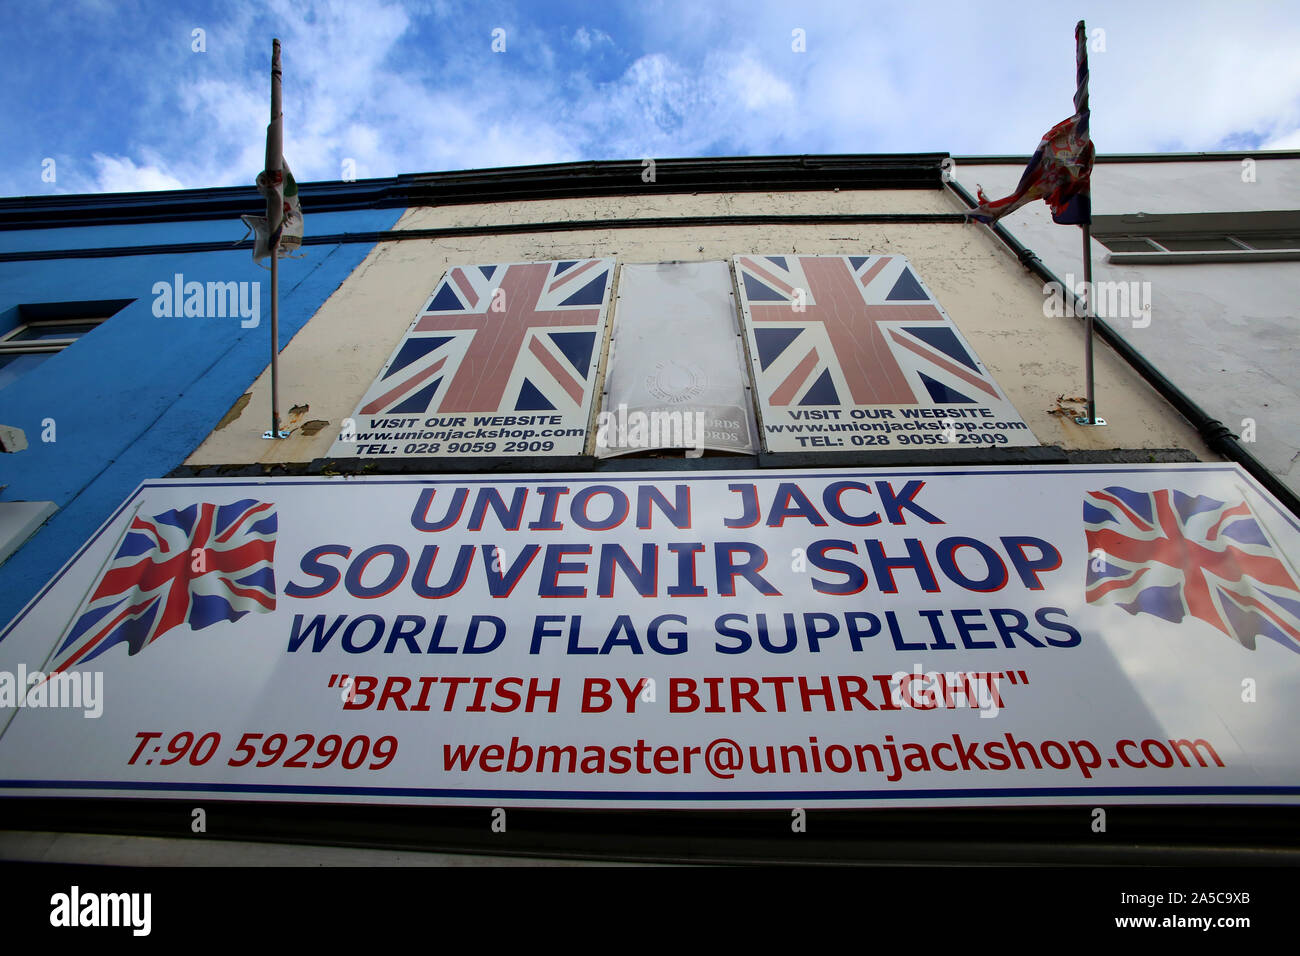 Belfast, UK. 19th Oct, 2019. A Union Jack Souvenir Shop is seen in east Belfast, Northern Ireland, the United Kingdom, on Oct. 19, 2019. British lawmakers on Saturday voted for a key amendment to force British Prime Minister Boris Johnson to seek another Brexit extension from the European Union (EU). Credit: Paul McErlane/Xinhua/Alamy Live News Stock Photo